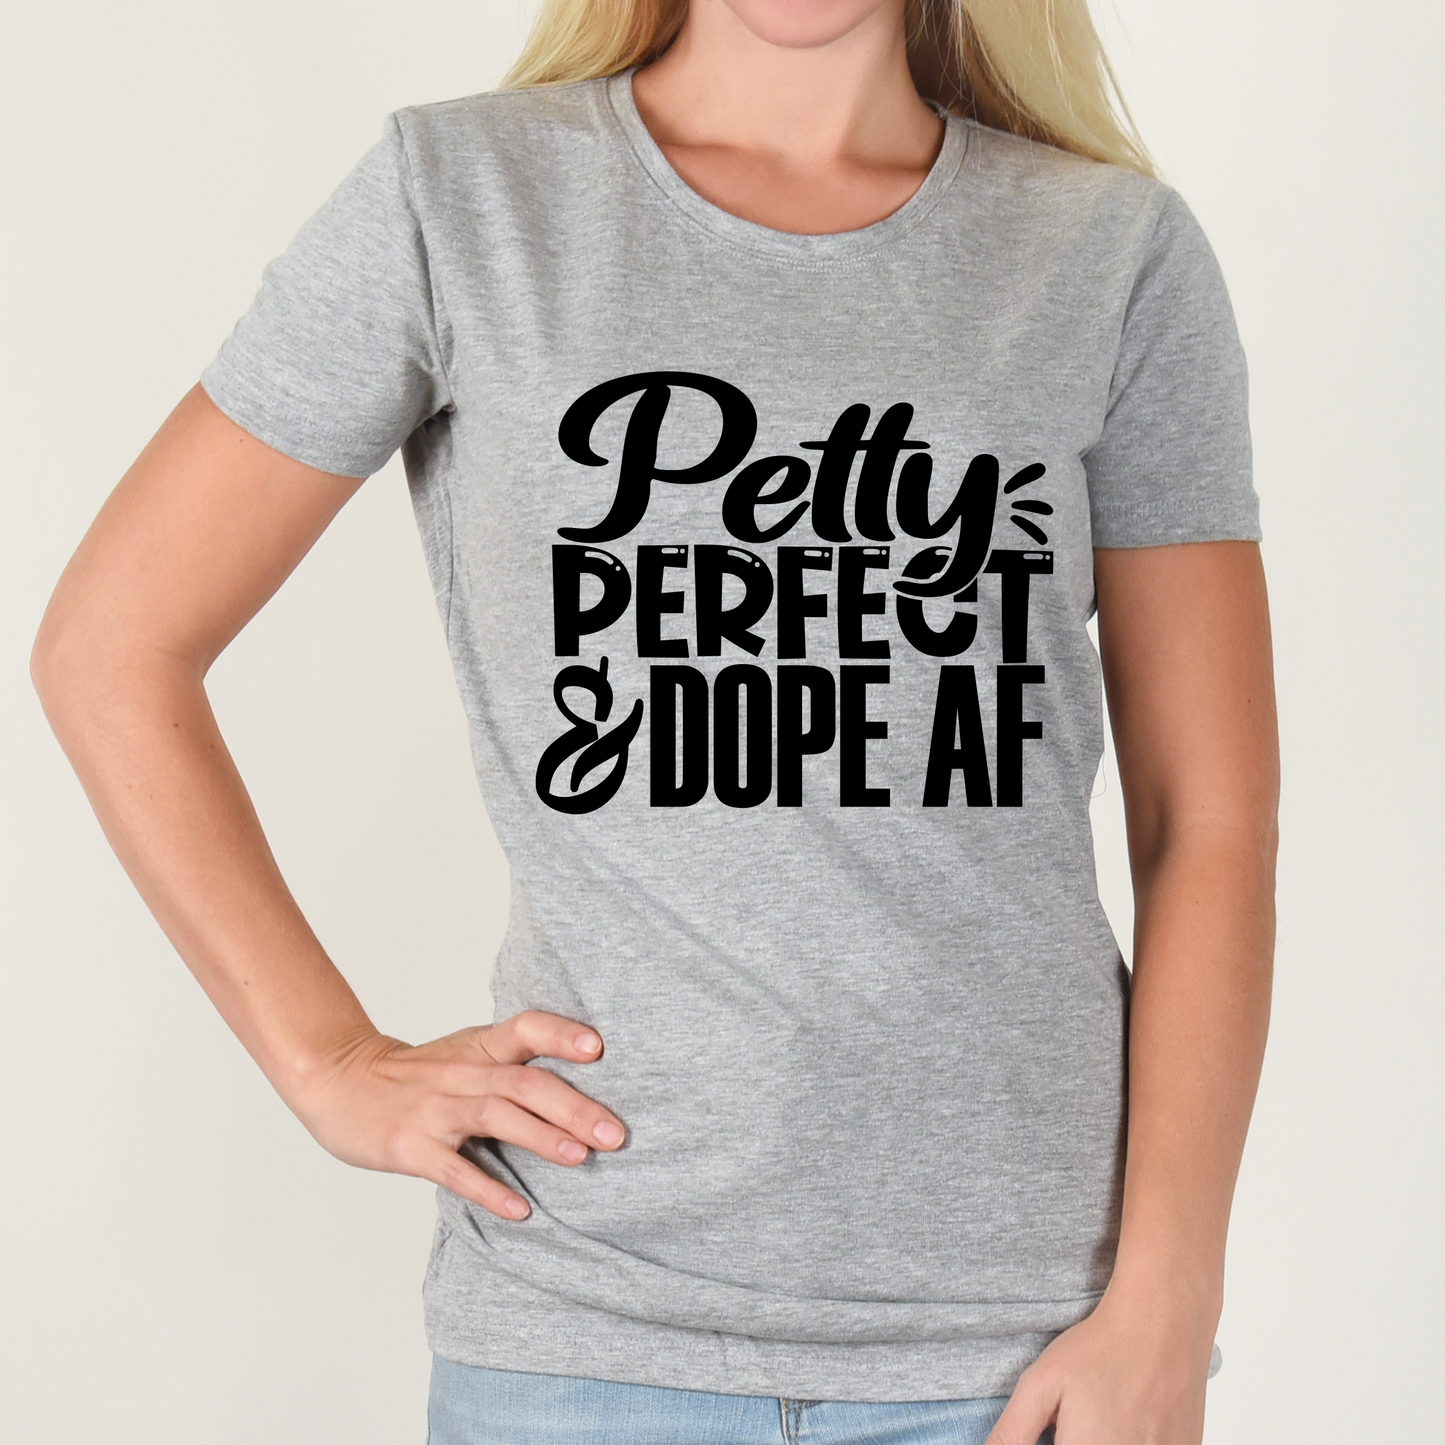 Petty, Perfect & Dope AF